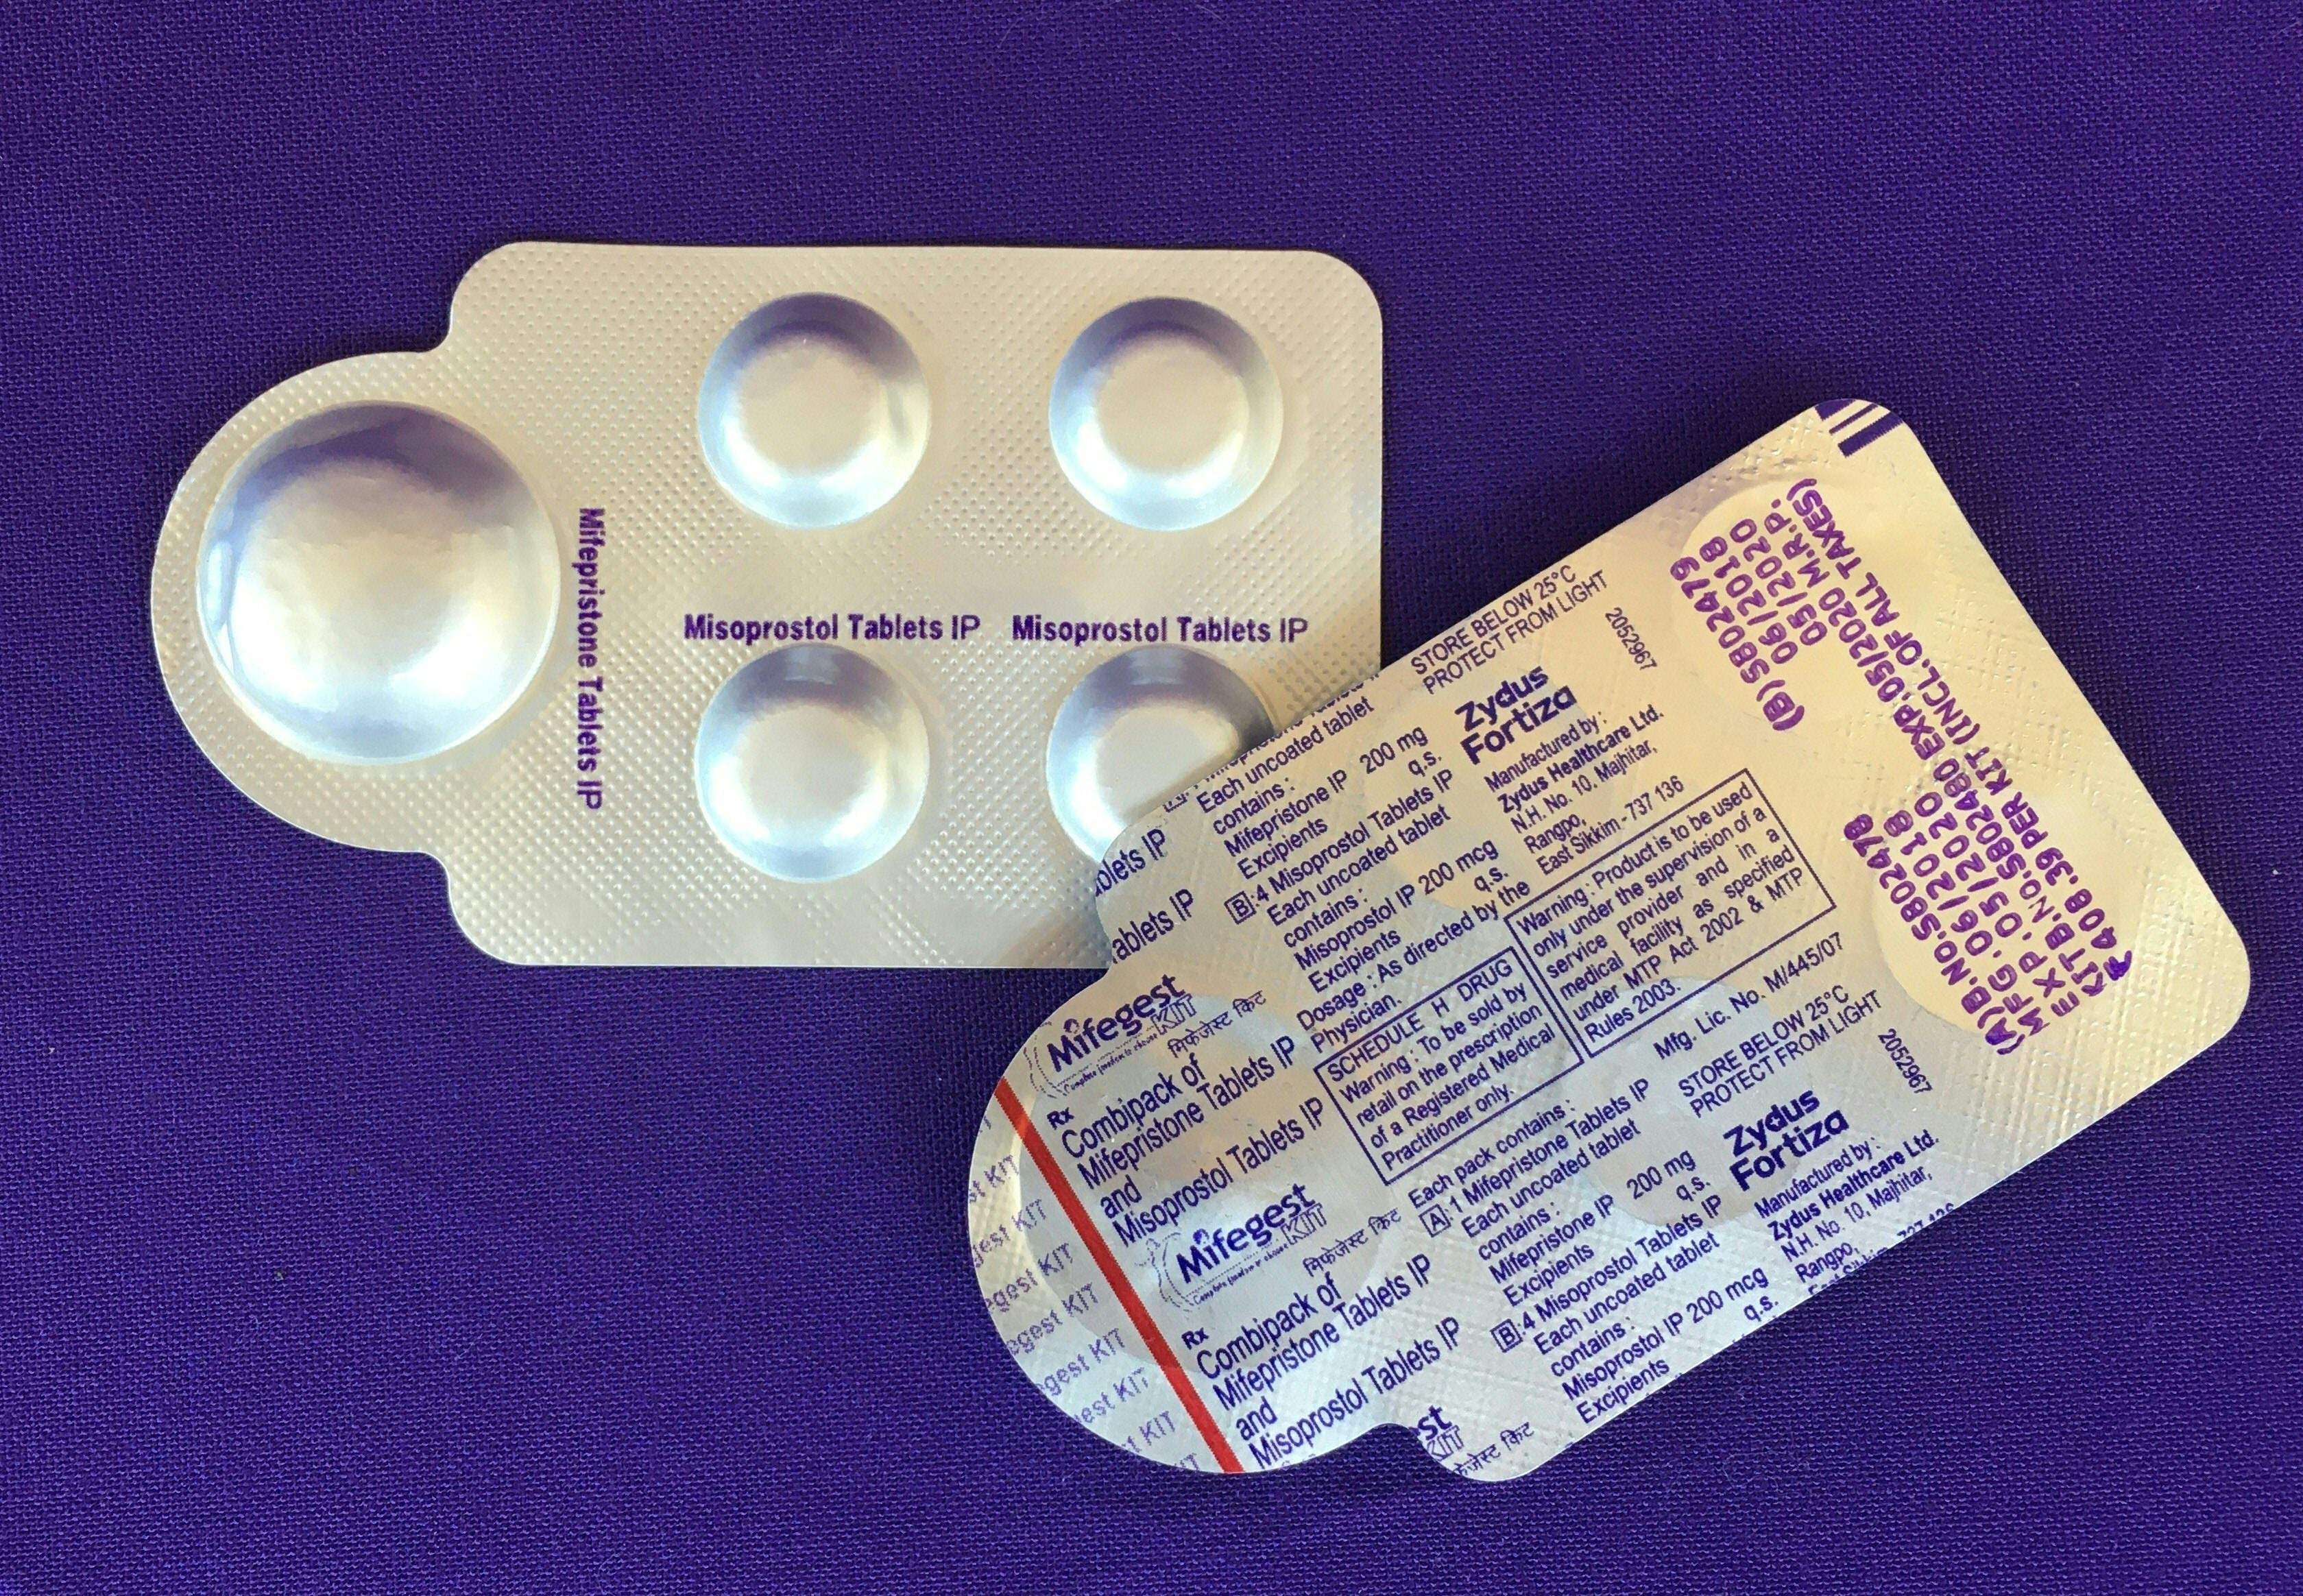 A two-drug regimen of mifepristone and misoprostol tablets is the most common form of abortion care in the US. Misoprostol also is used to treat miscarriages.